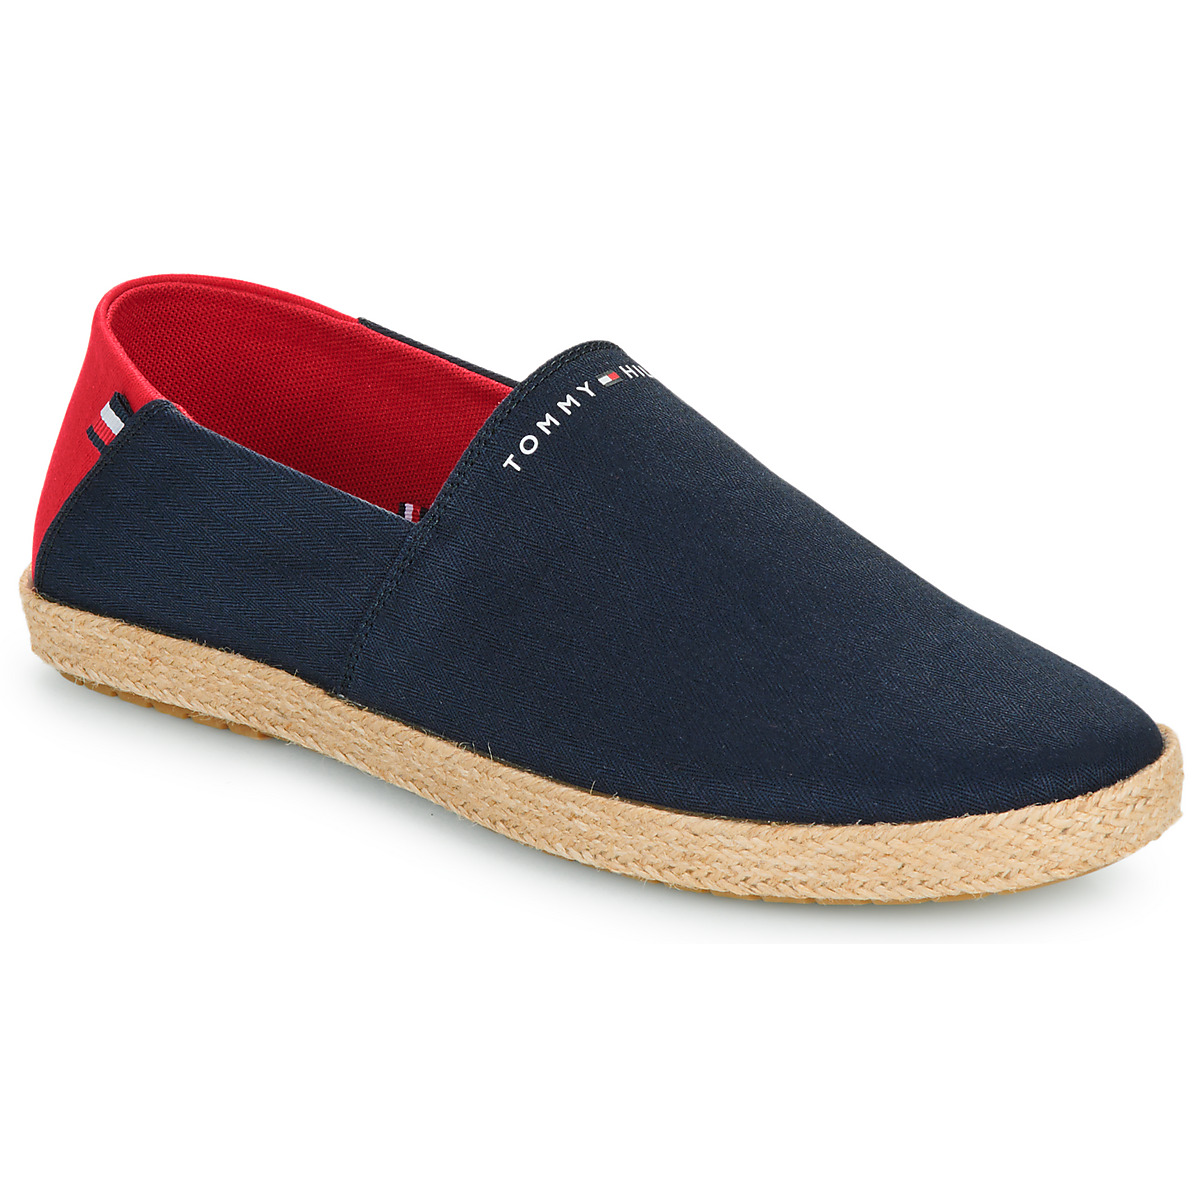 Chaussures Homme Geantă TOMMY HILFIGER Honey Med Tote AW0AW04547 413 HILFIGER ESPADRILLE CORE TEXTILE Marine